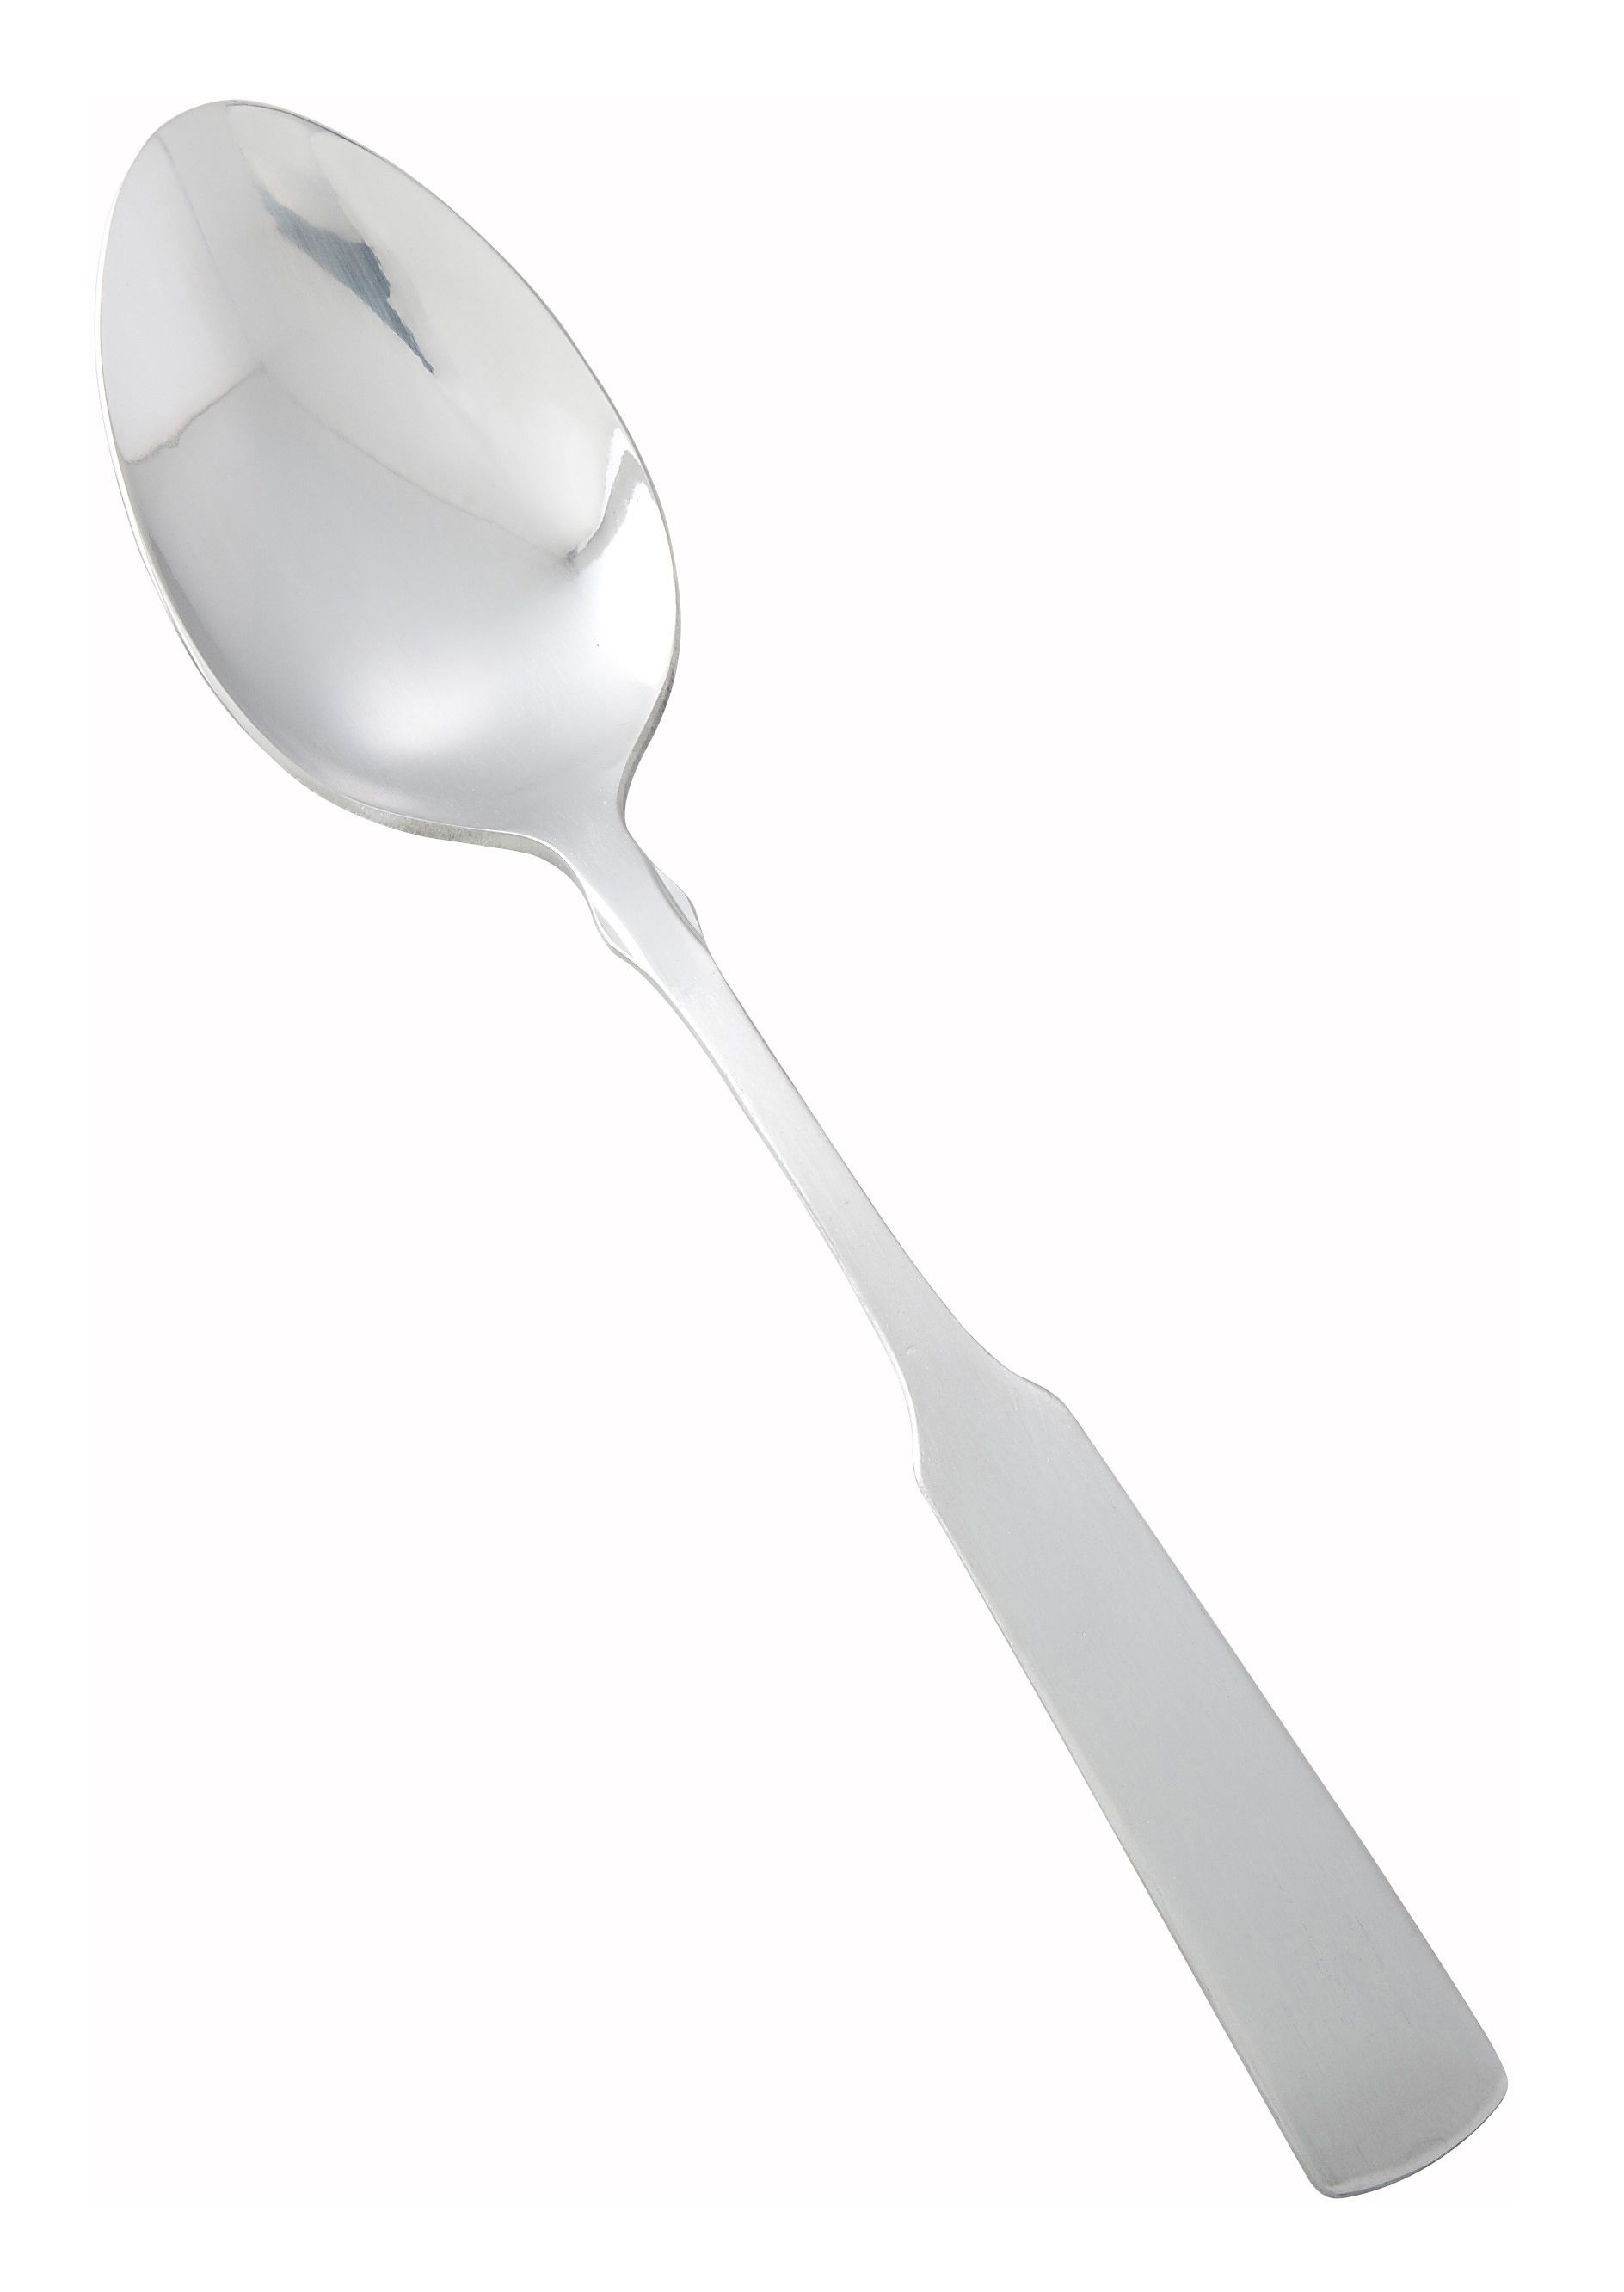 Winco 0025-03 Houston Heavy Weight Satin Finish Stainless Steel Dinner Spoon (12/Pack)